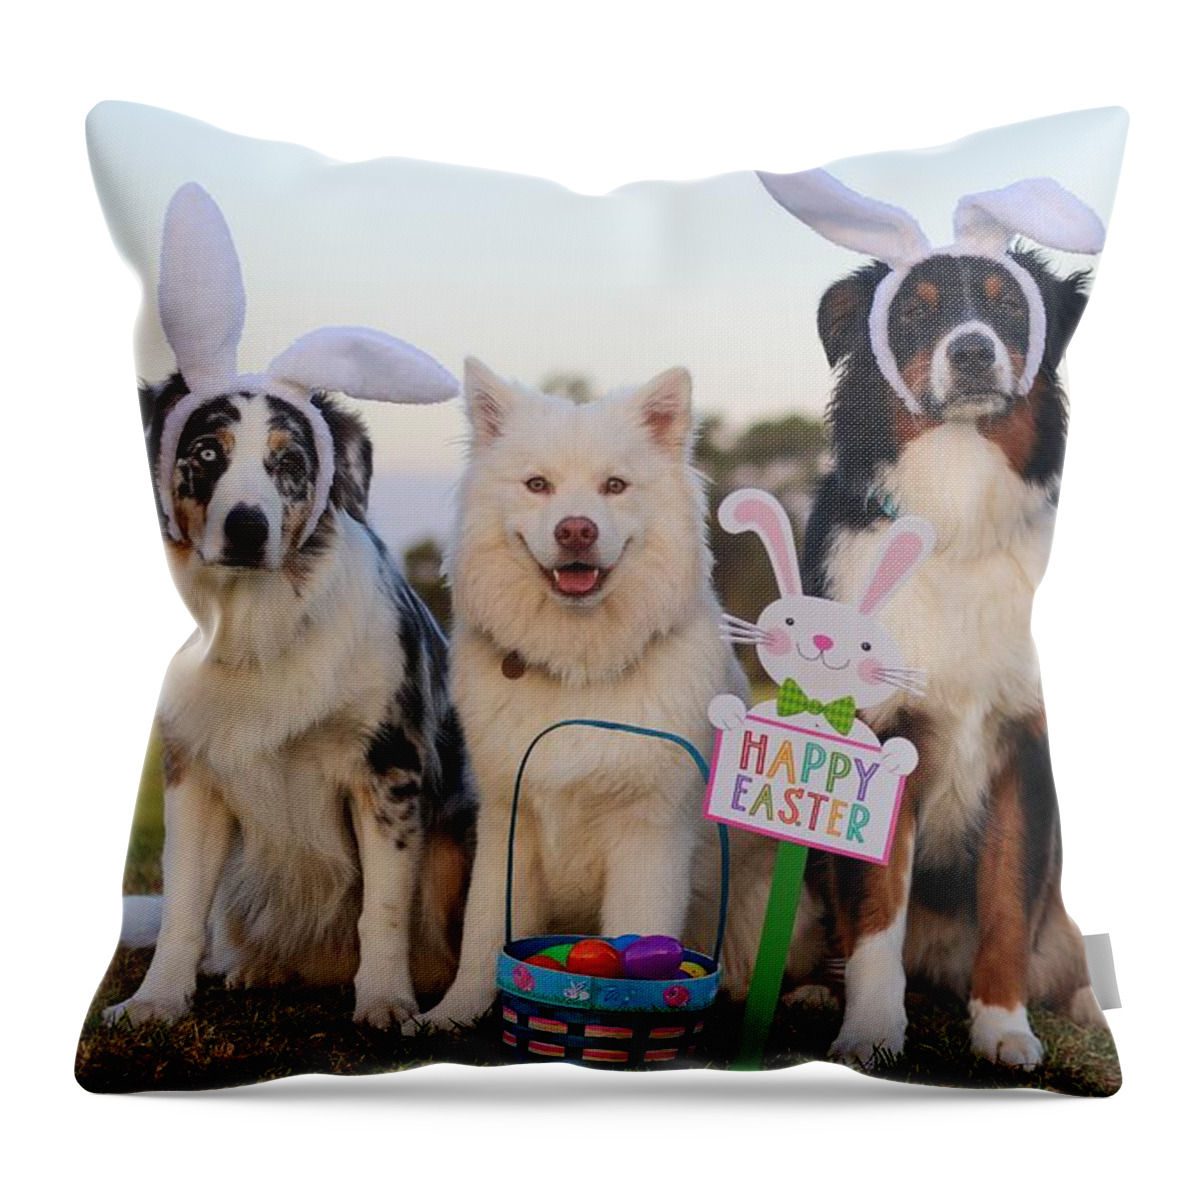 Happy Throw Pillow featuring the digital art Happy Easter by Kathy Tarochione